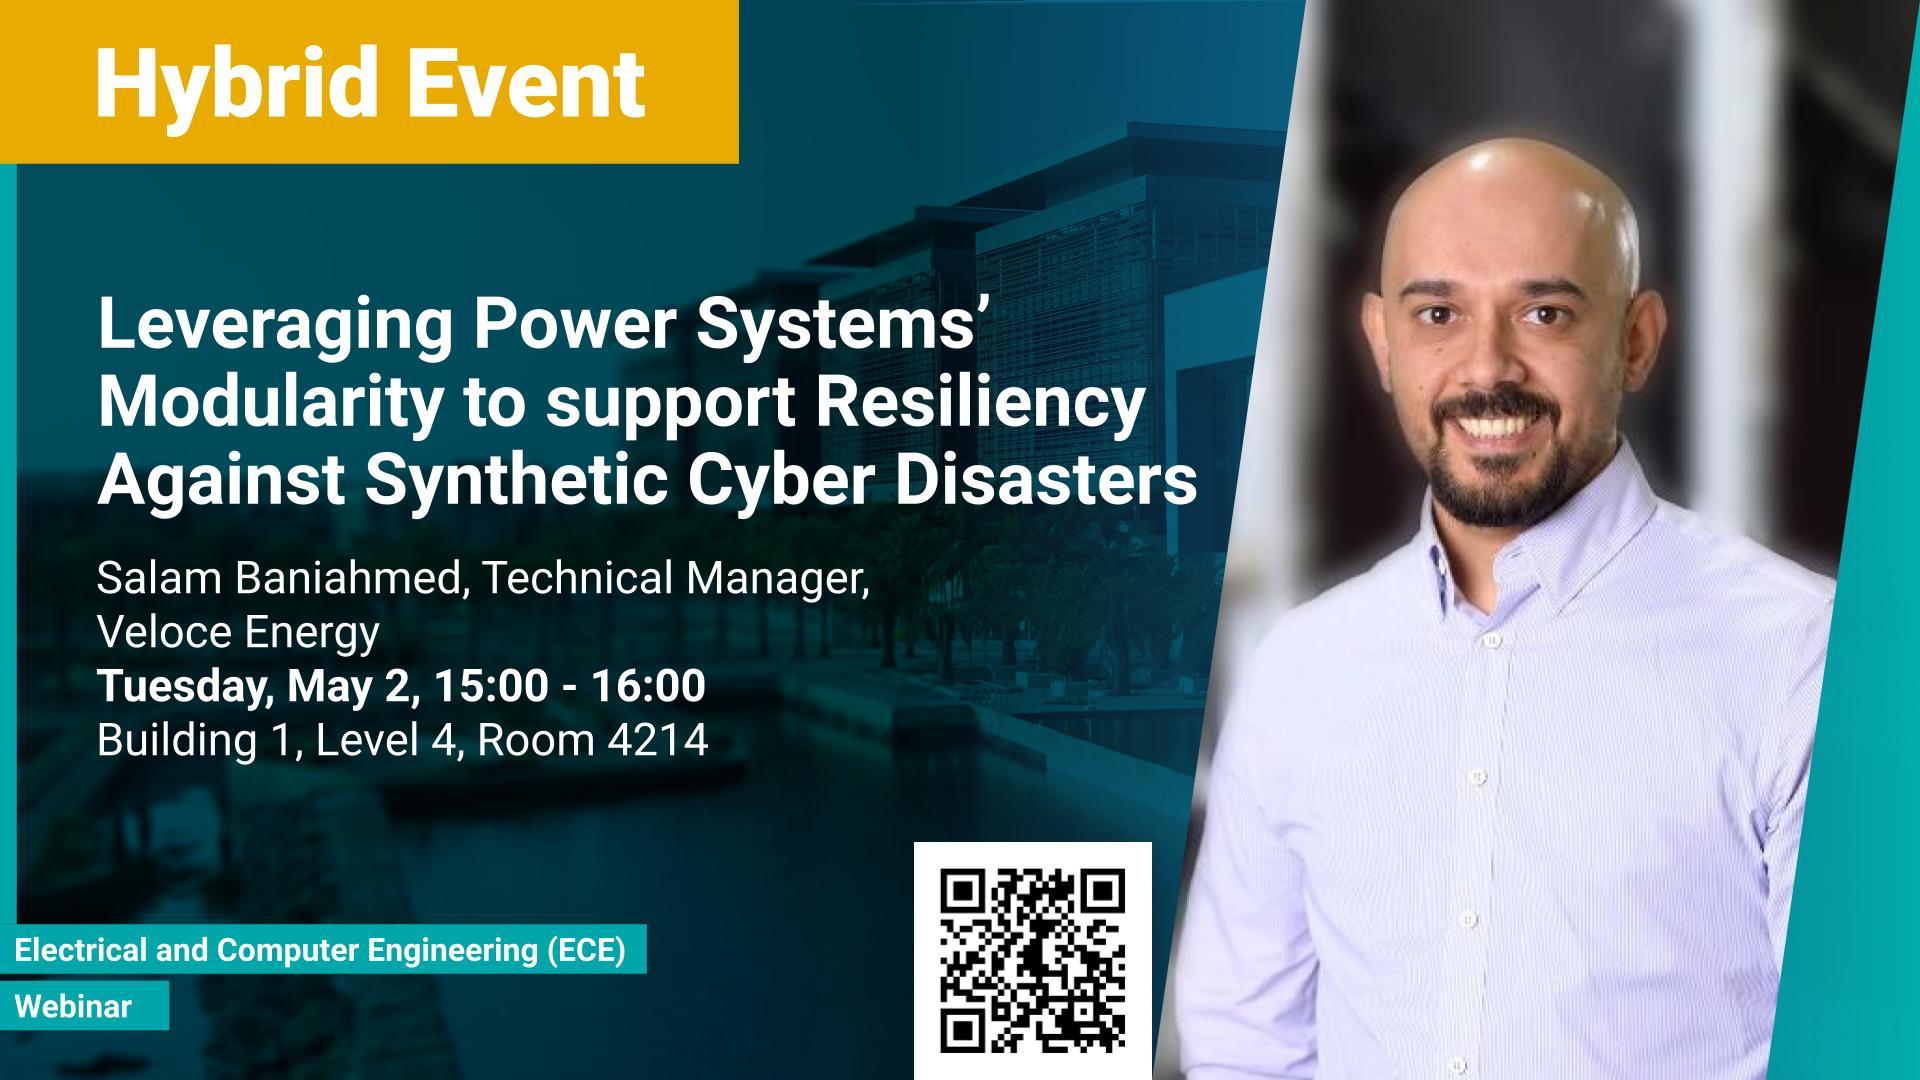 KAUST-CEMSE-ECE-Webinar-Salam-Baniahmed-Leveraging-Power-Systems-Modularity-to-support-Resiliency-Against-Synthetic-Cyber-Disasters.jpg